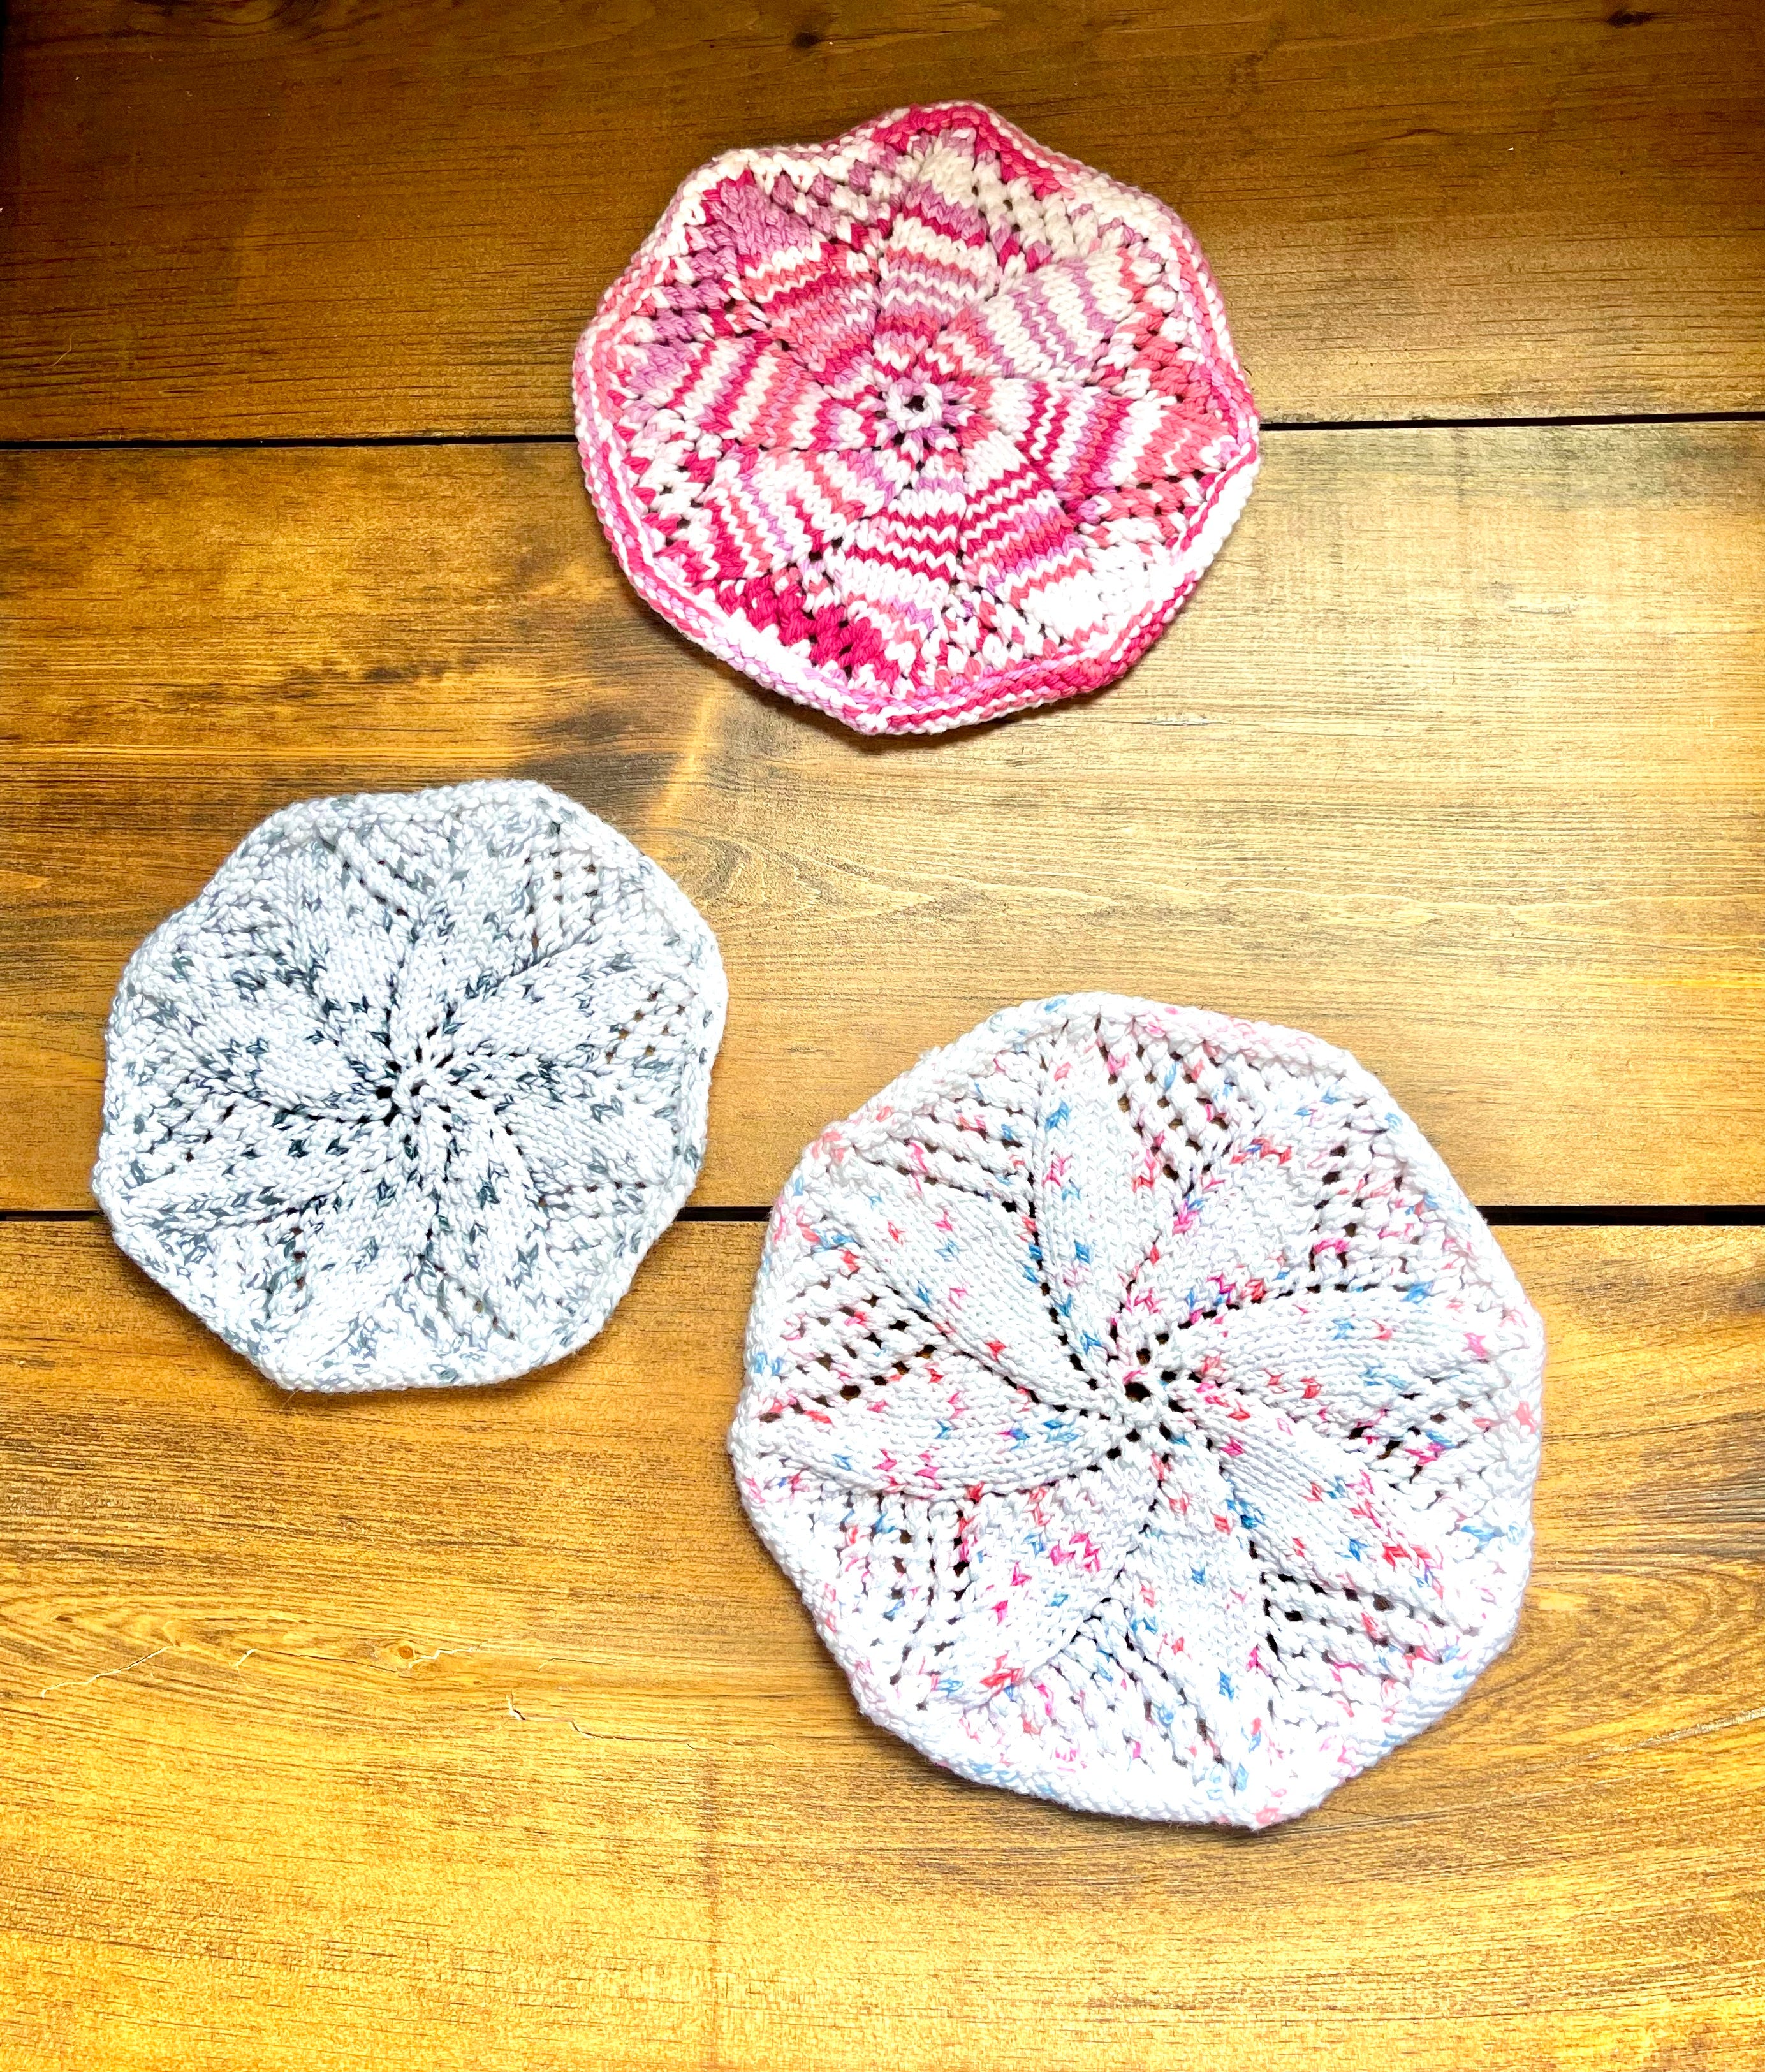 Hand-knitted Round Dishcloth or Trivet, 3 sizes